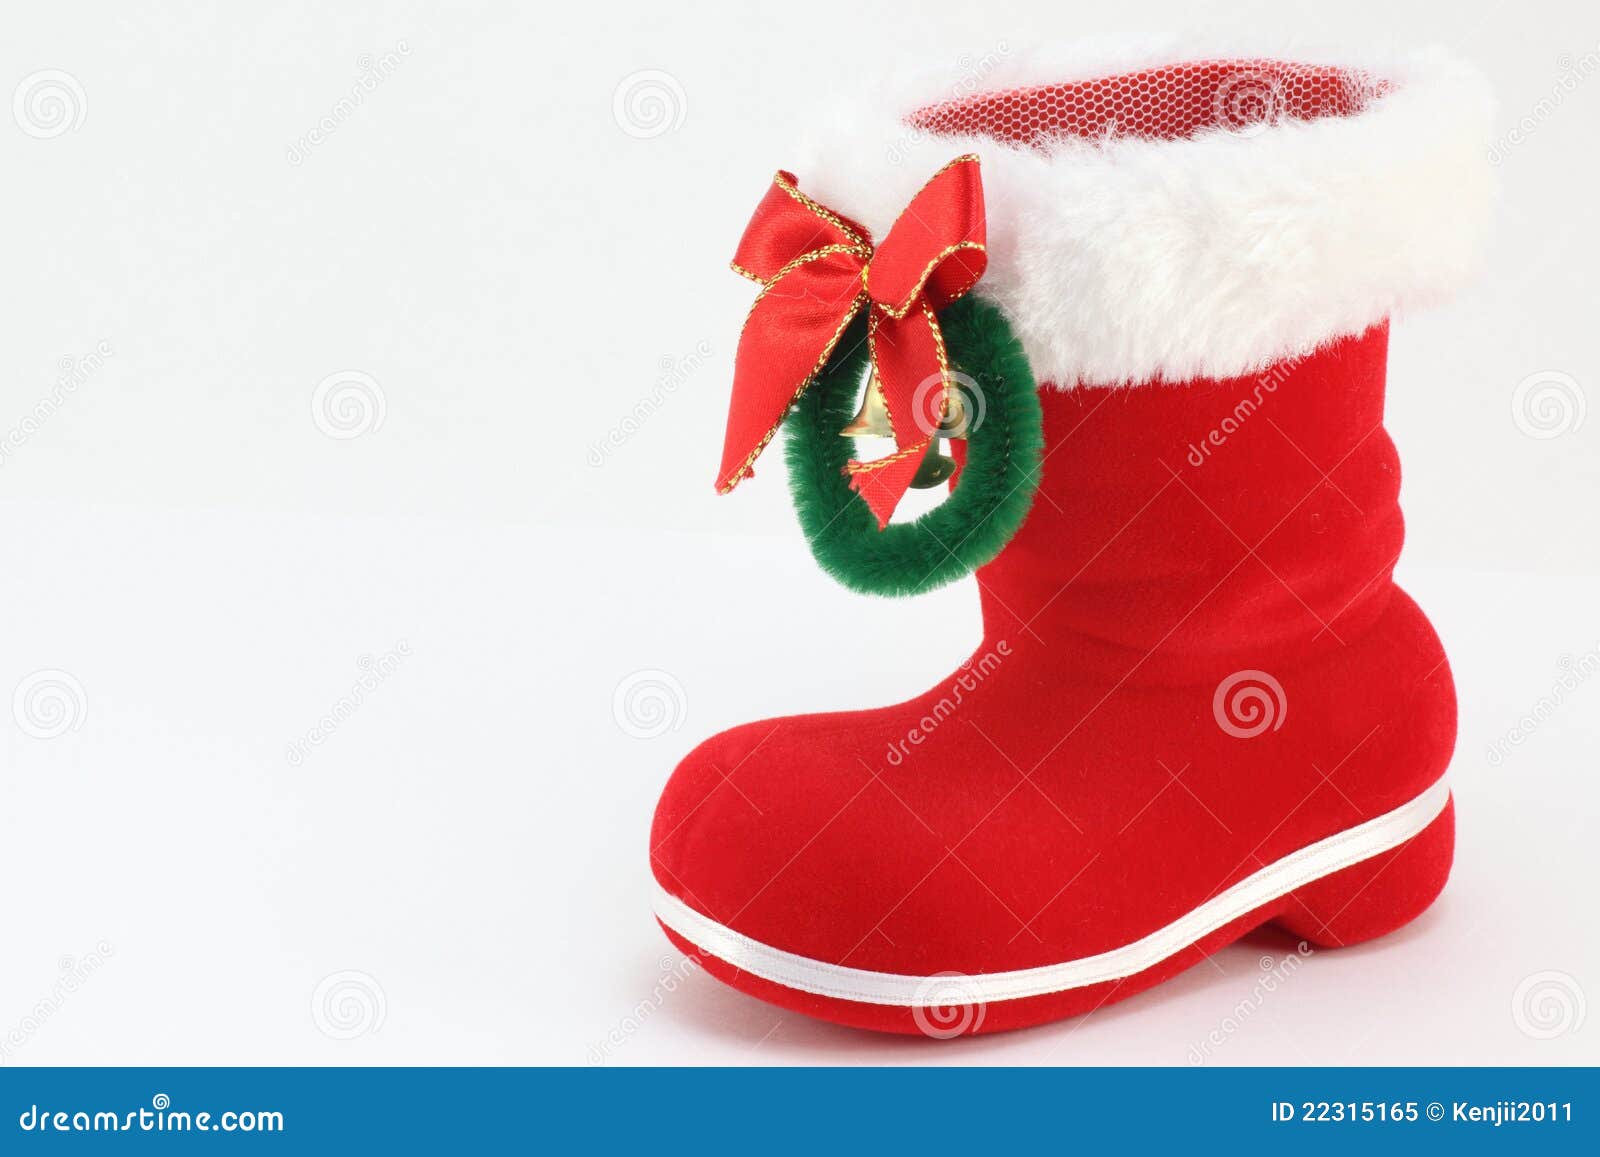 Santa s boots stock image. Image of festivals, space - 22315165